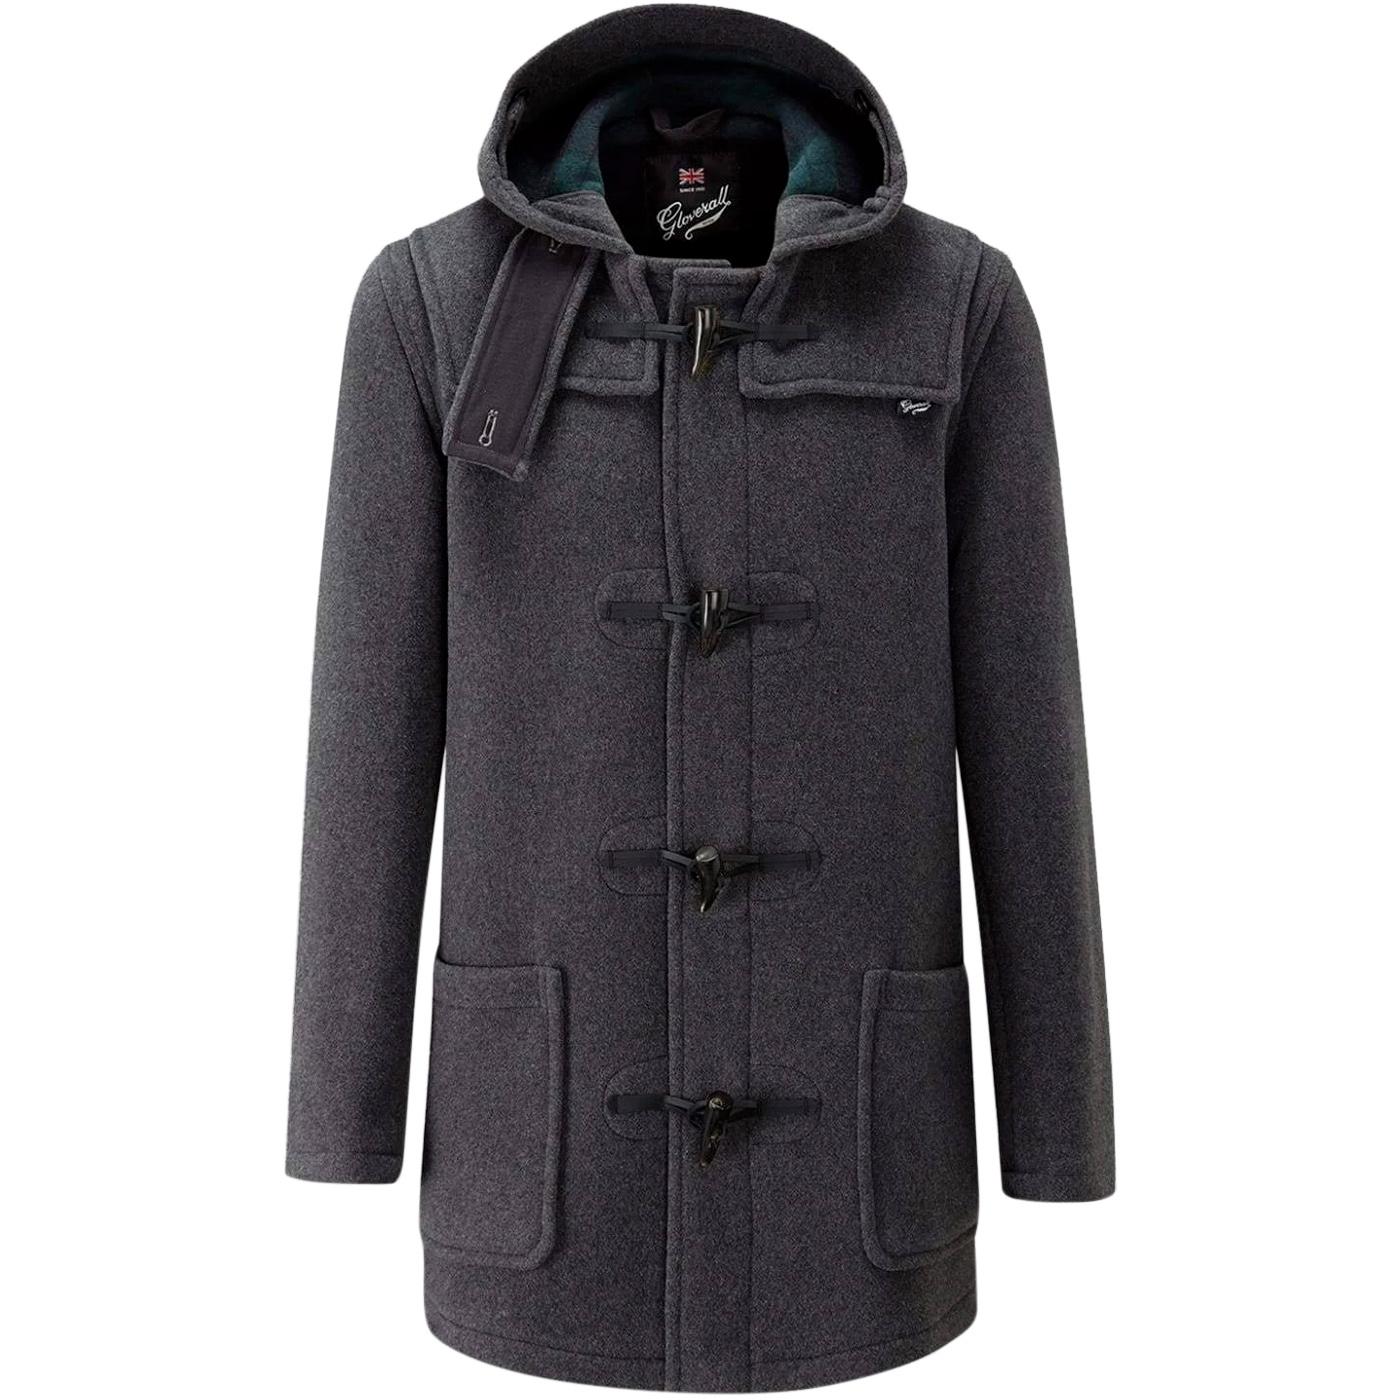 GLOVERALL Made in England Check Back Duffle Coat G